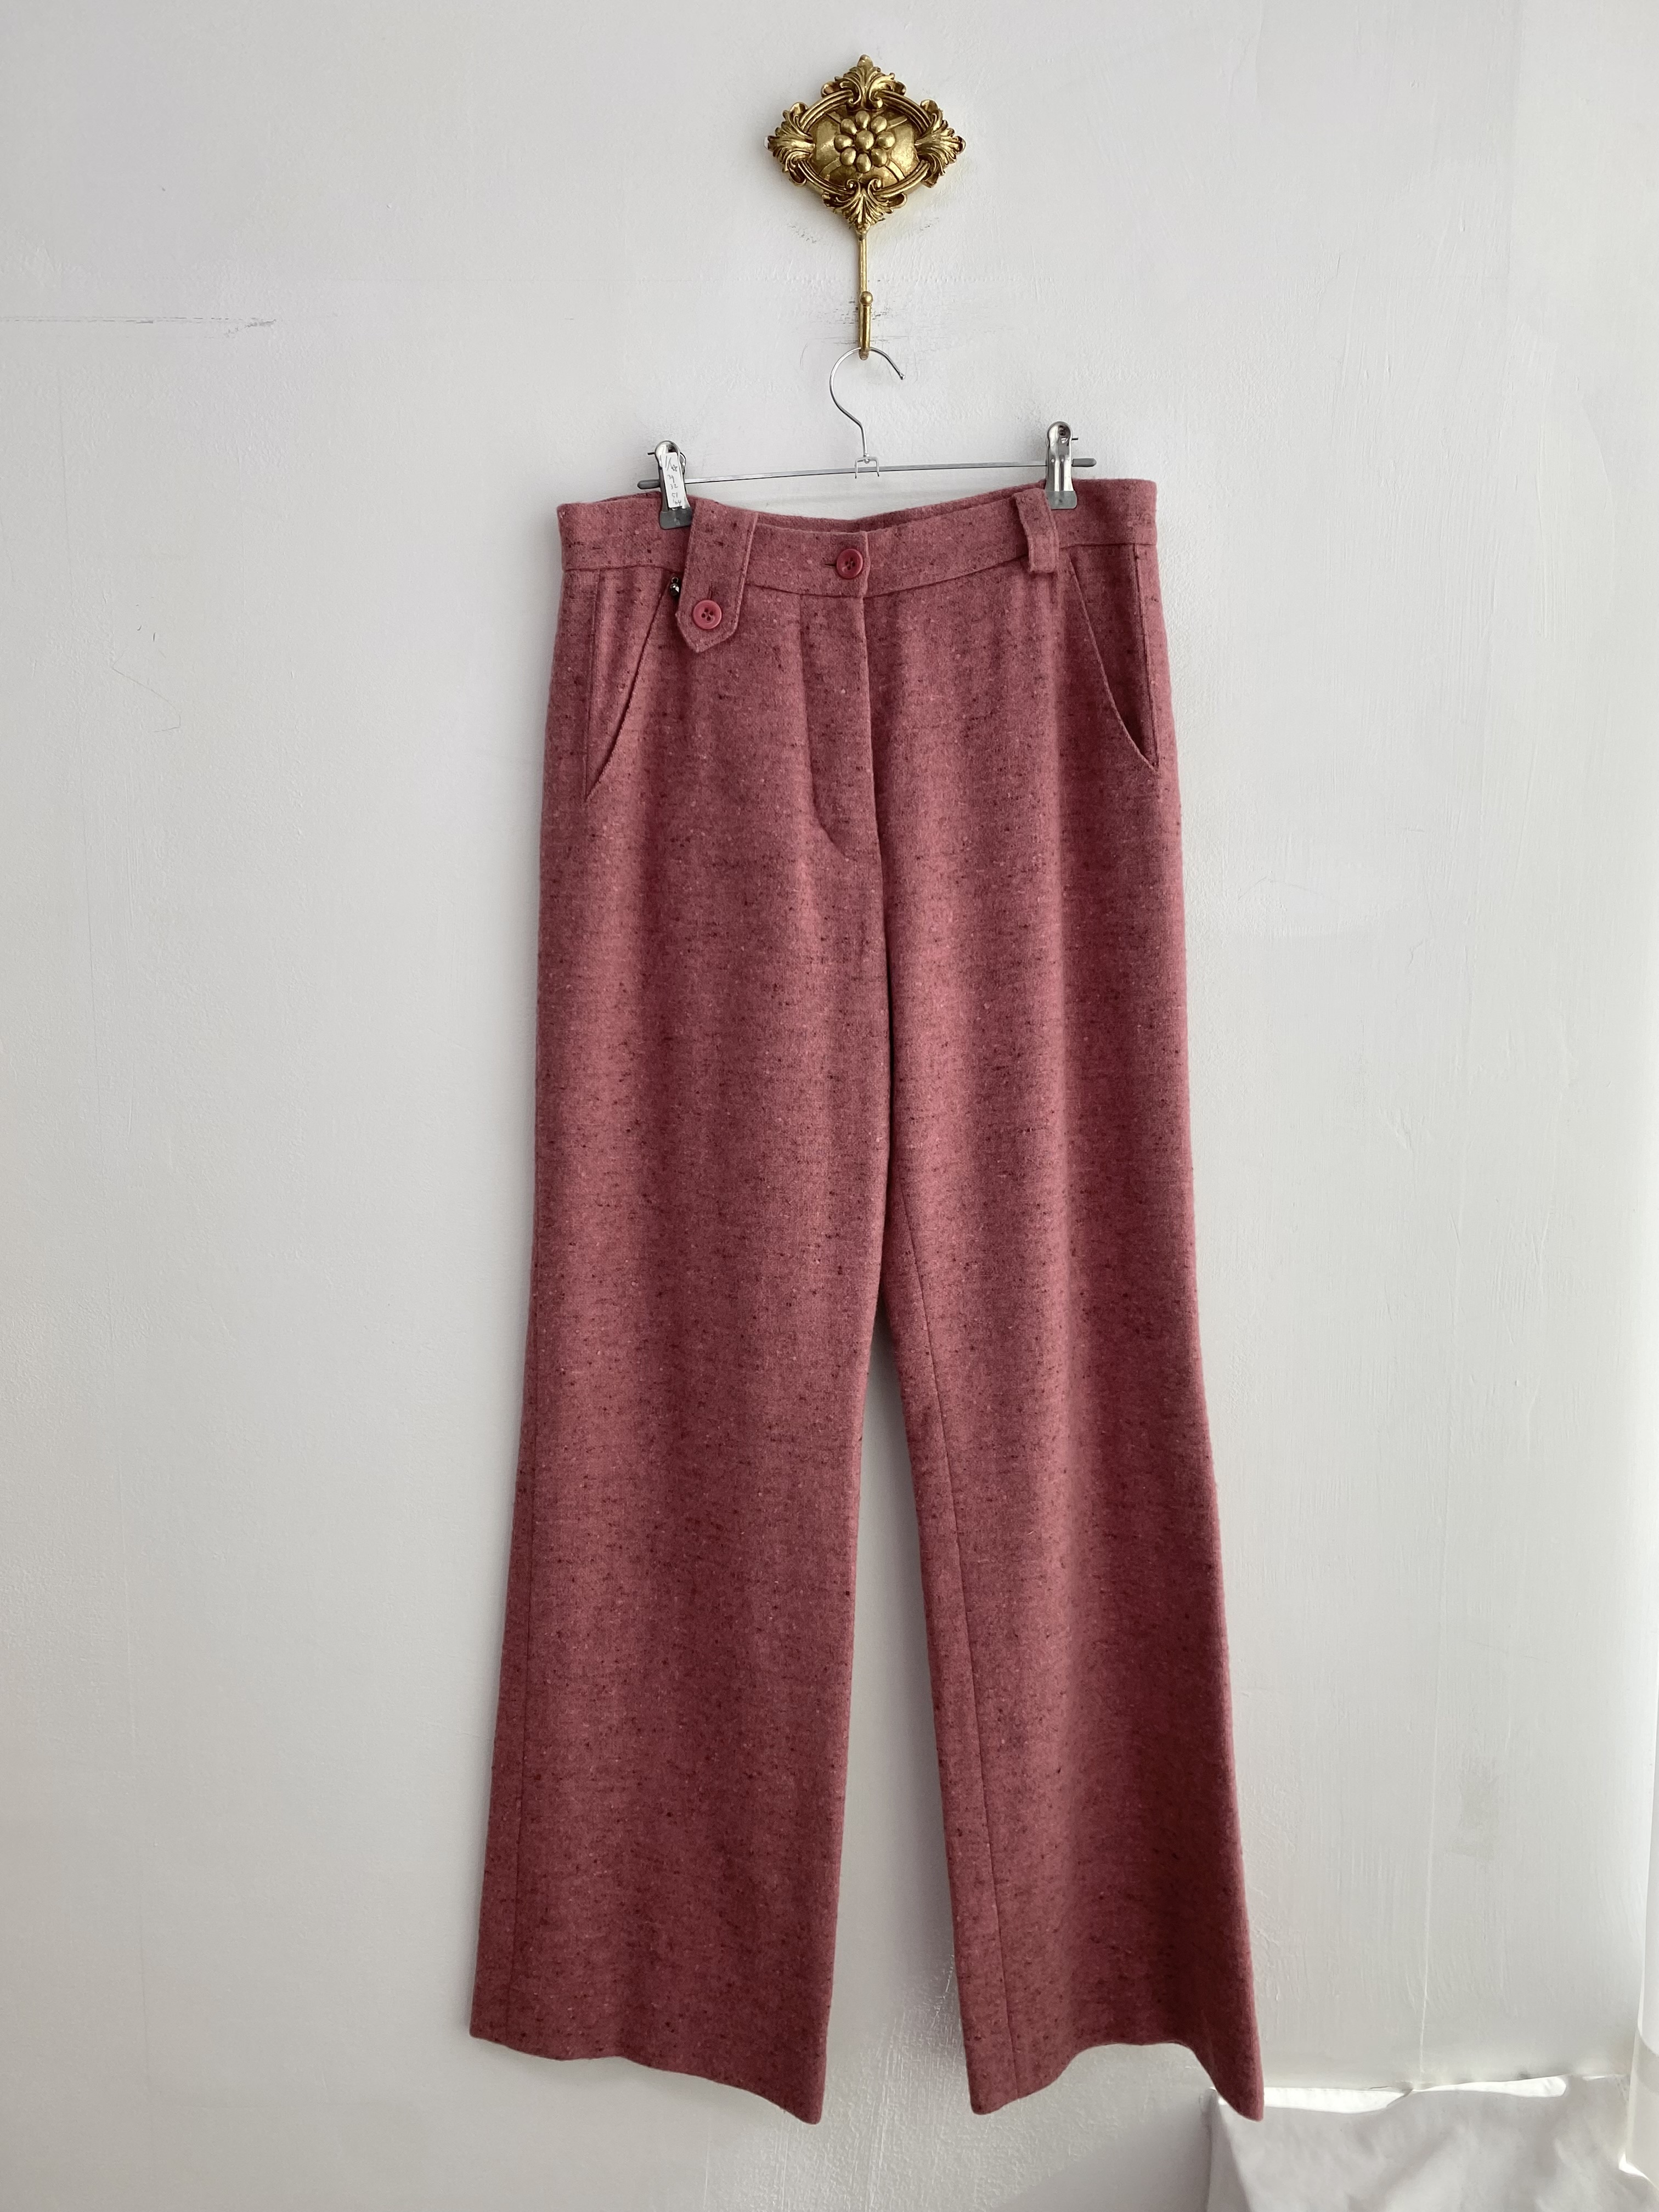 Sonia Rykiel pink knit wide long pants (made in france)